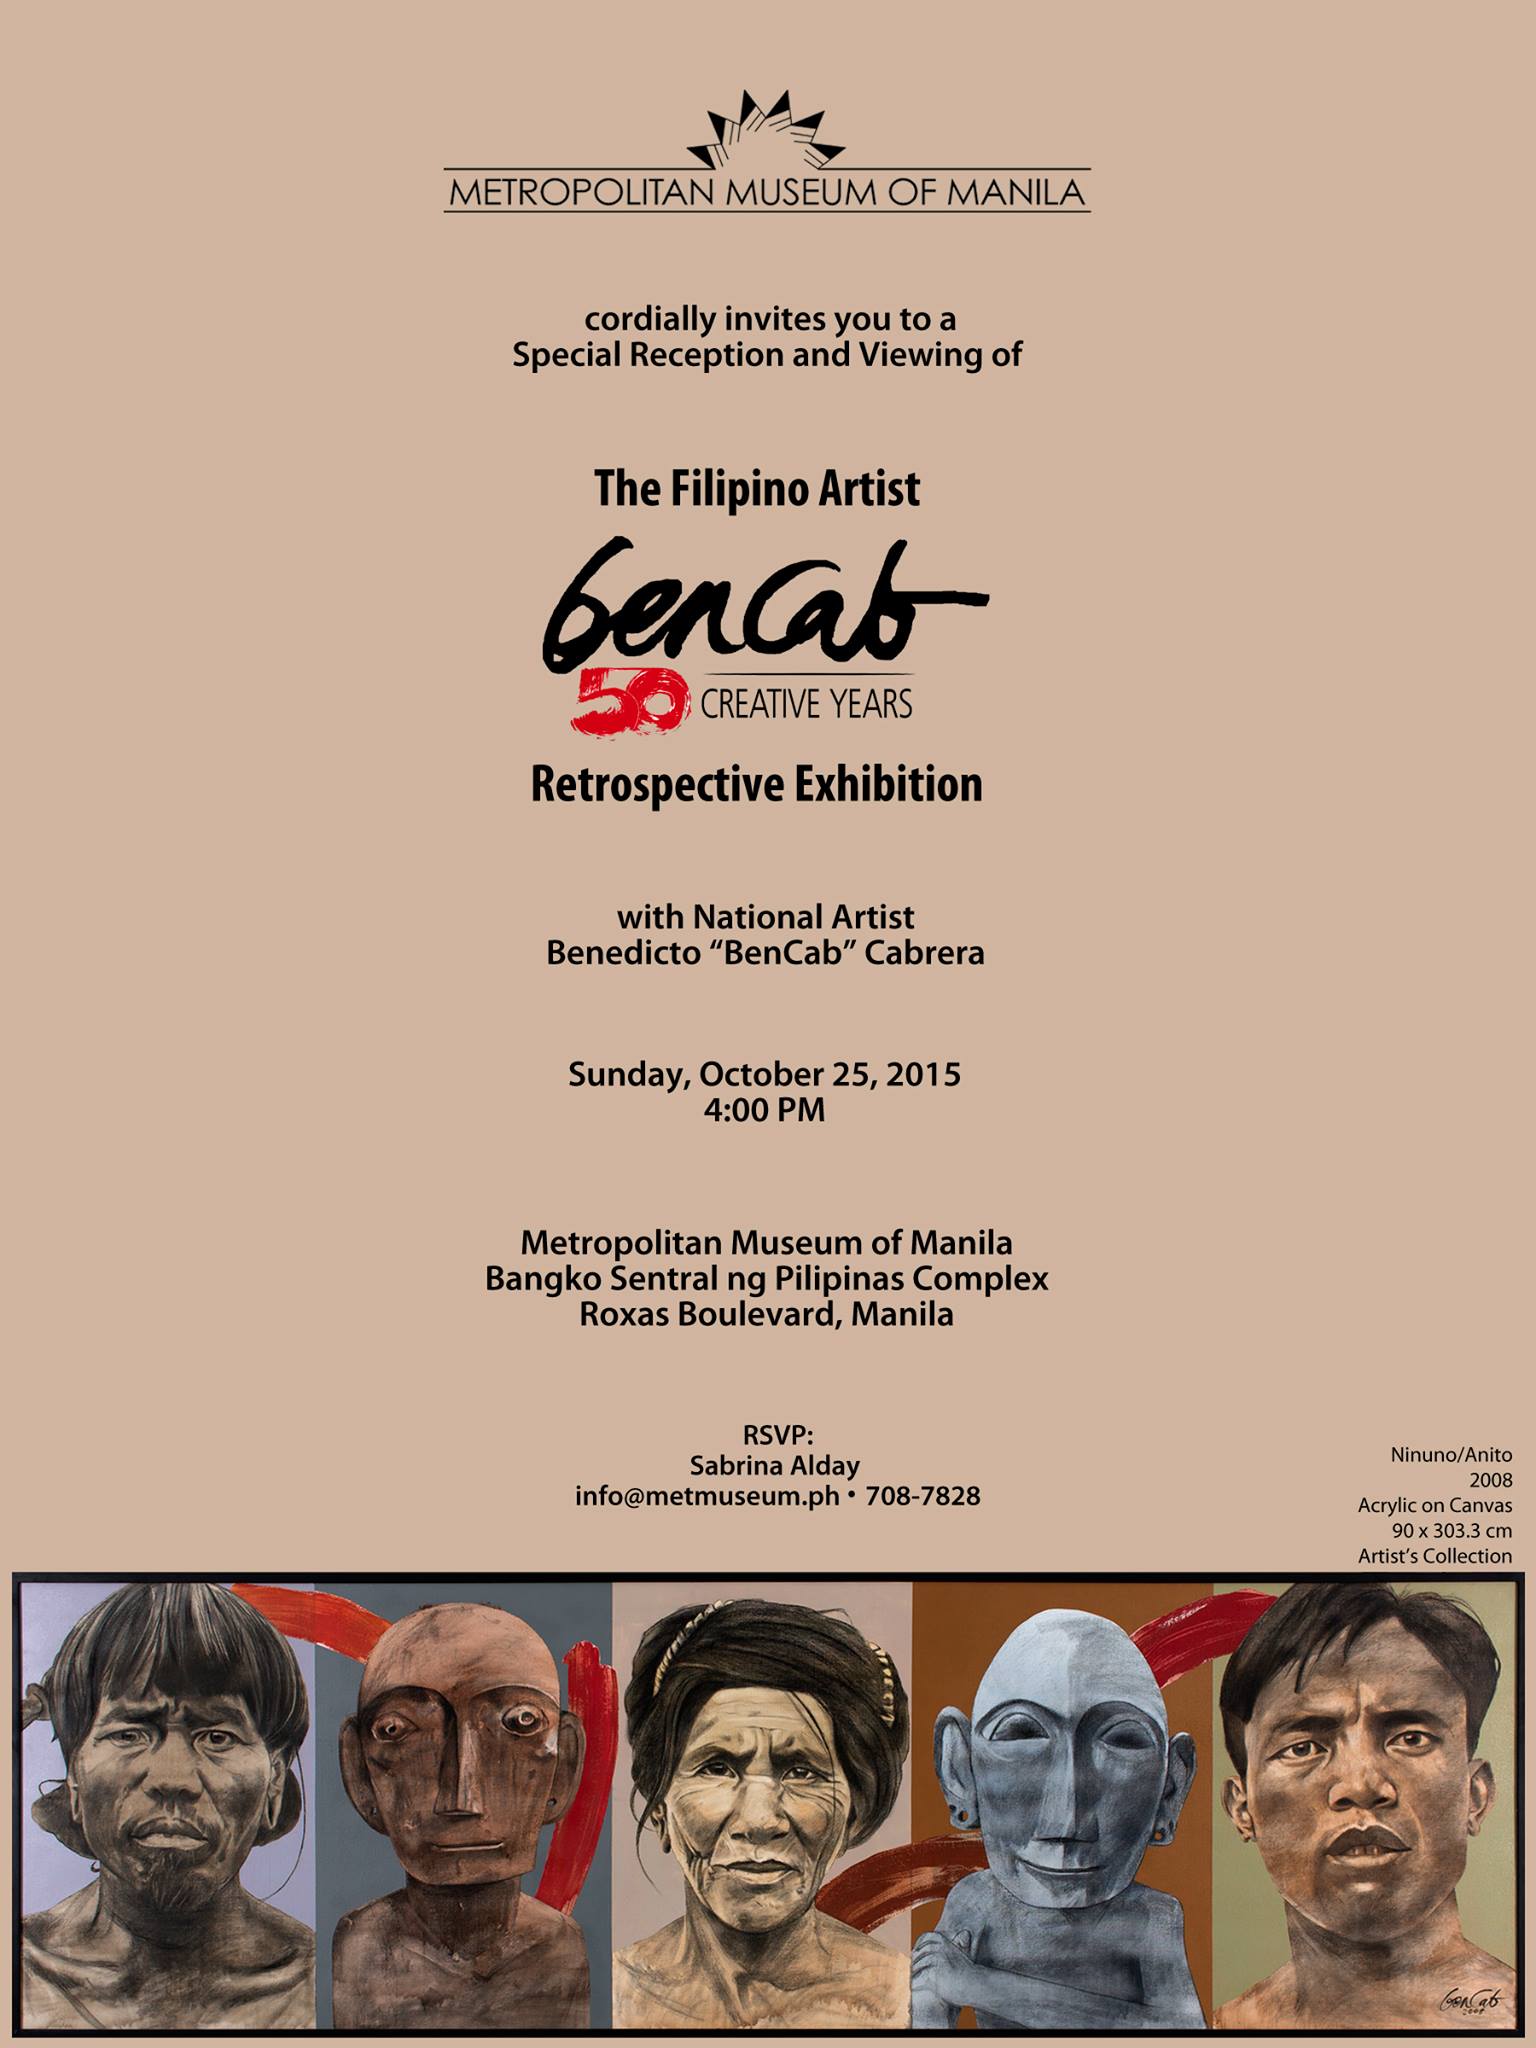 Sunday, October 25 Awit Nadera We hope you can come to the opening reception of BENCAB: The Filipino Artist, A 50-Year Retrospective Exhibition at the Metropolitan Museum of Manila on Sunday 25 October at 4pm! It will be a cool & casual gathering of friends, artists & family Cheers! ben&annie